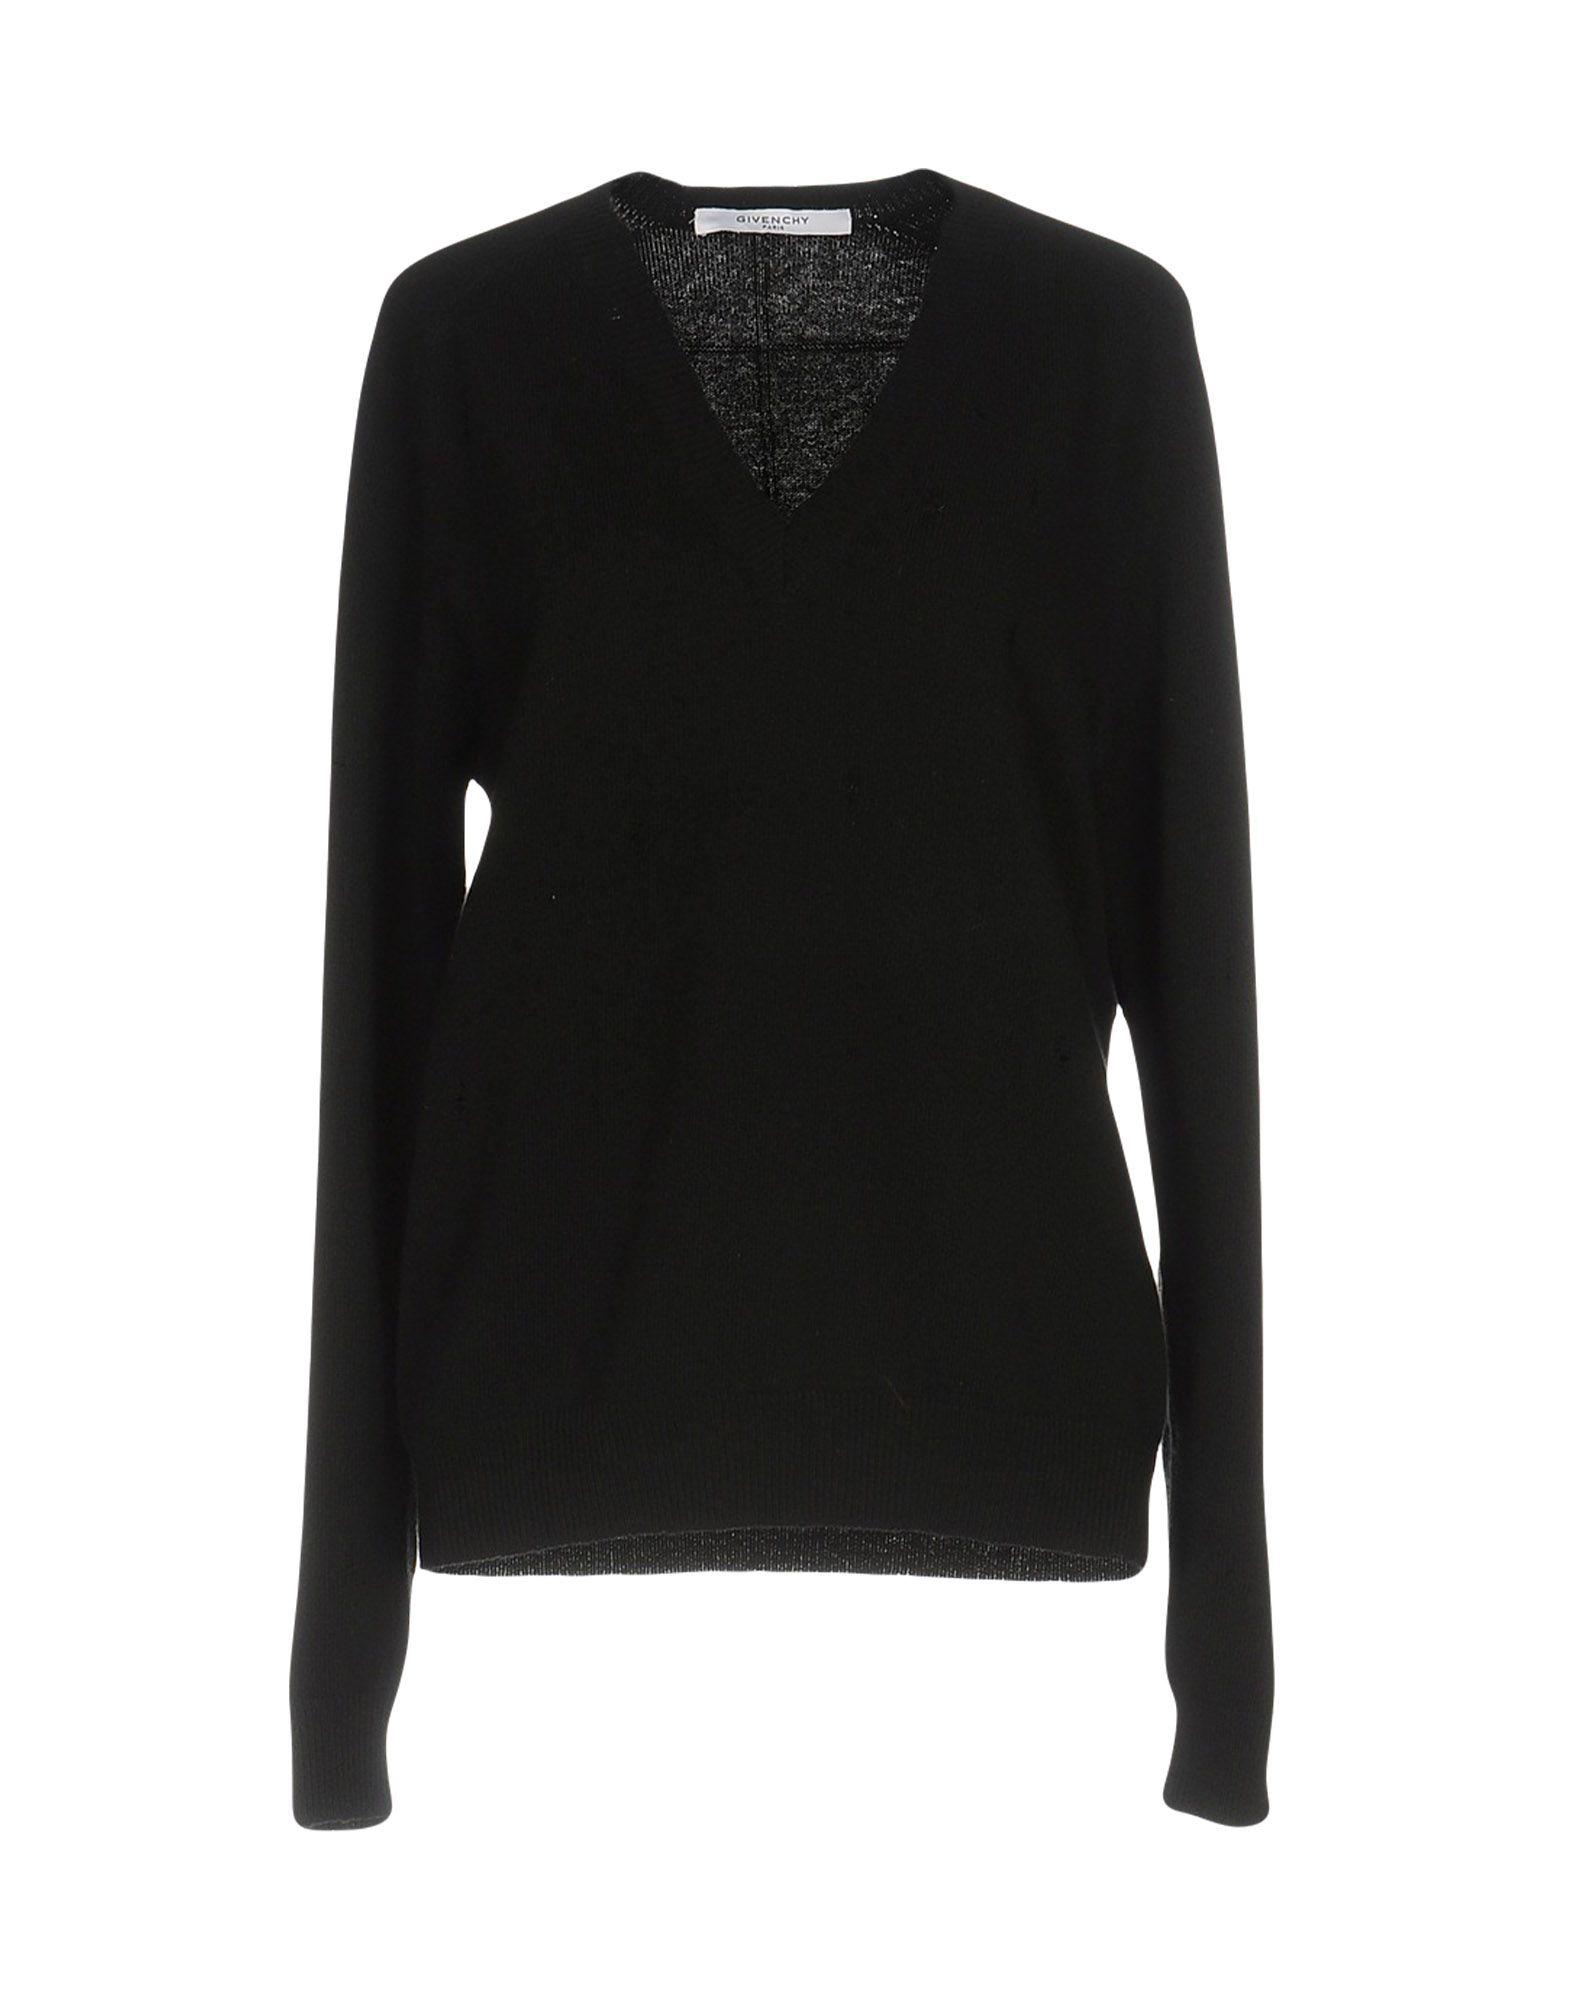 Givenchy Wool Jumper in Black - Lyst